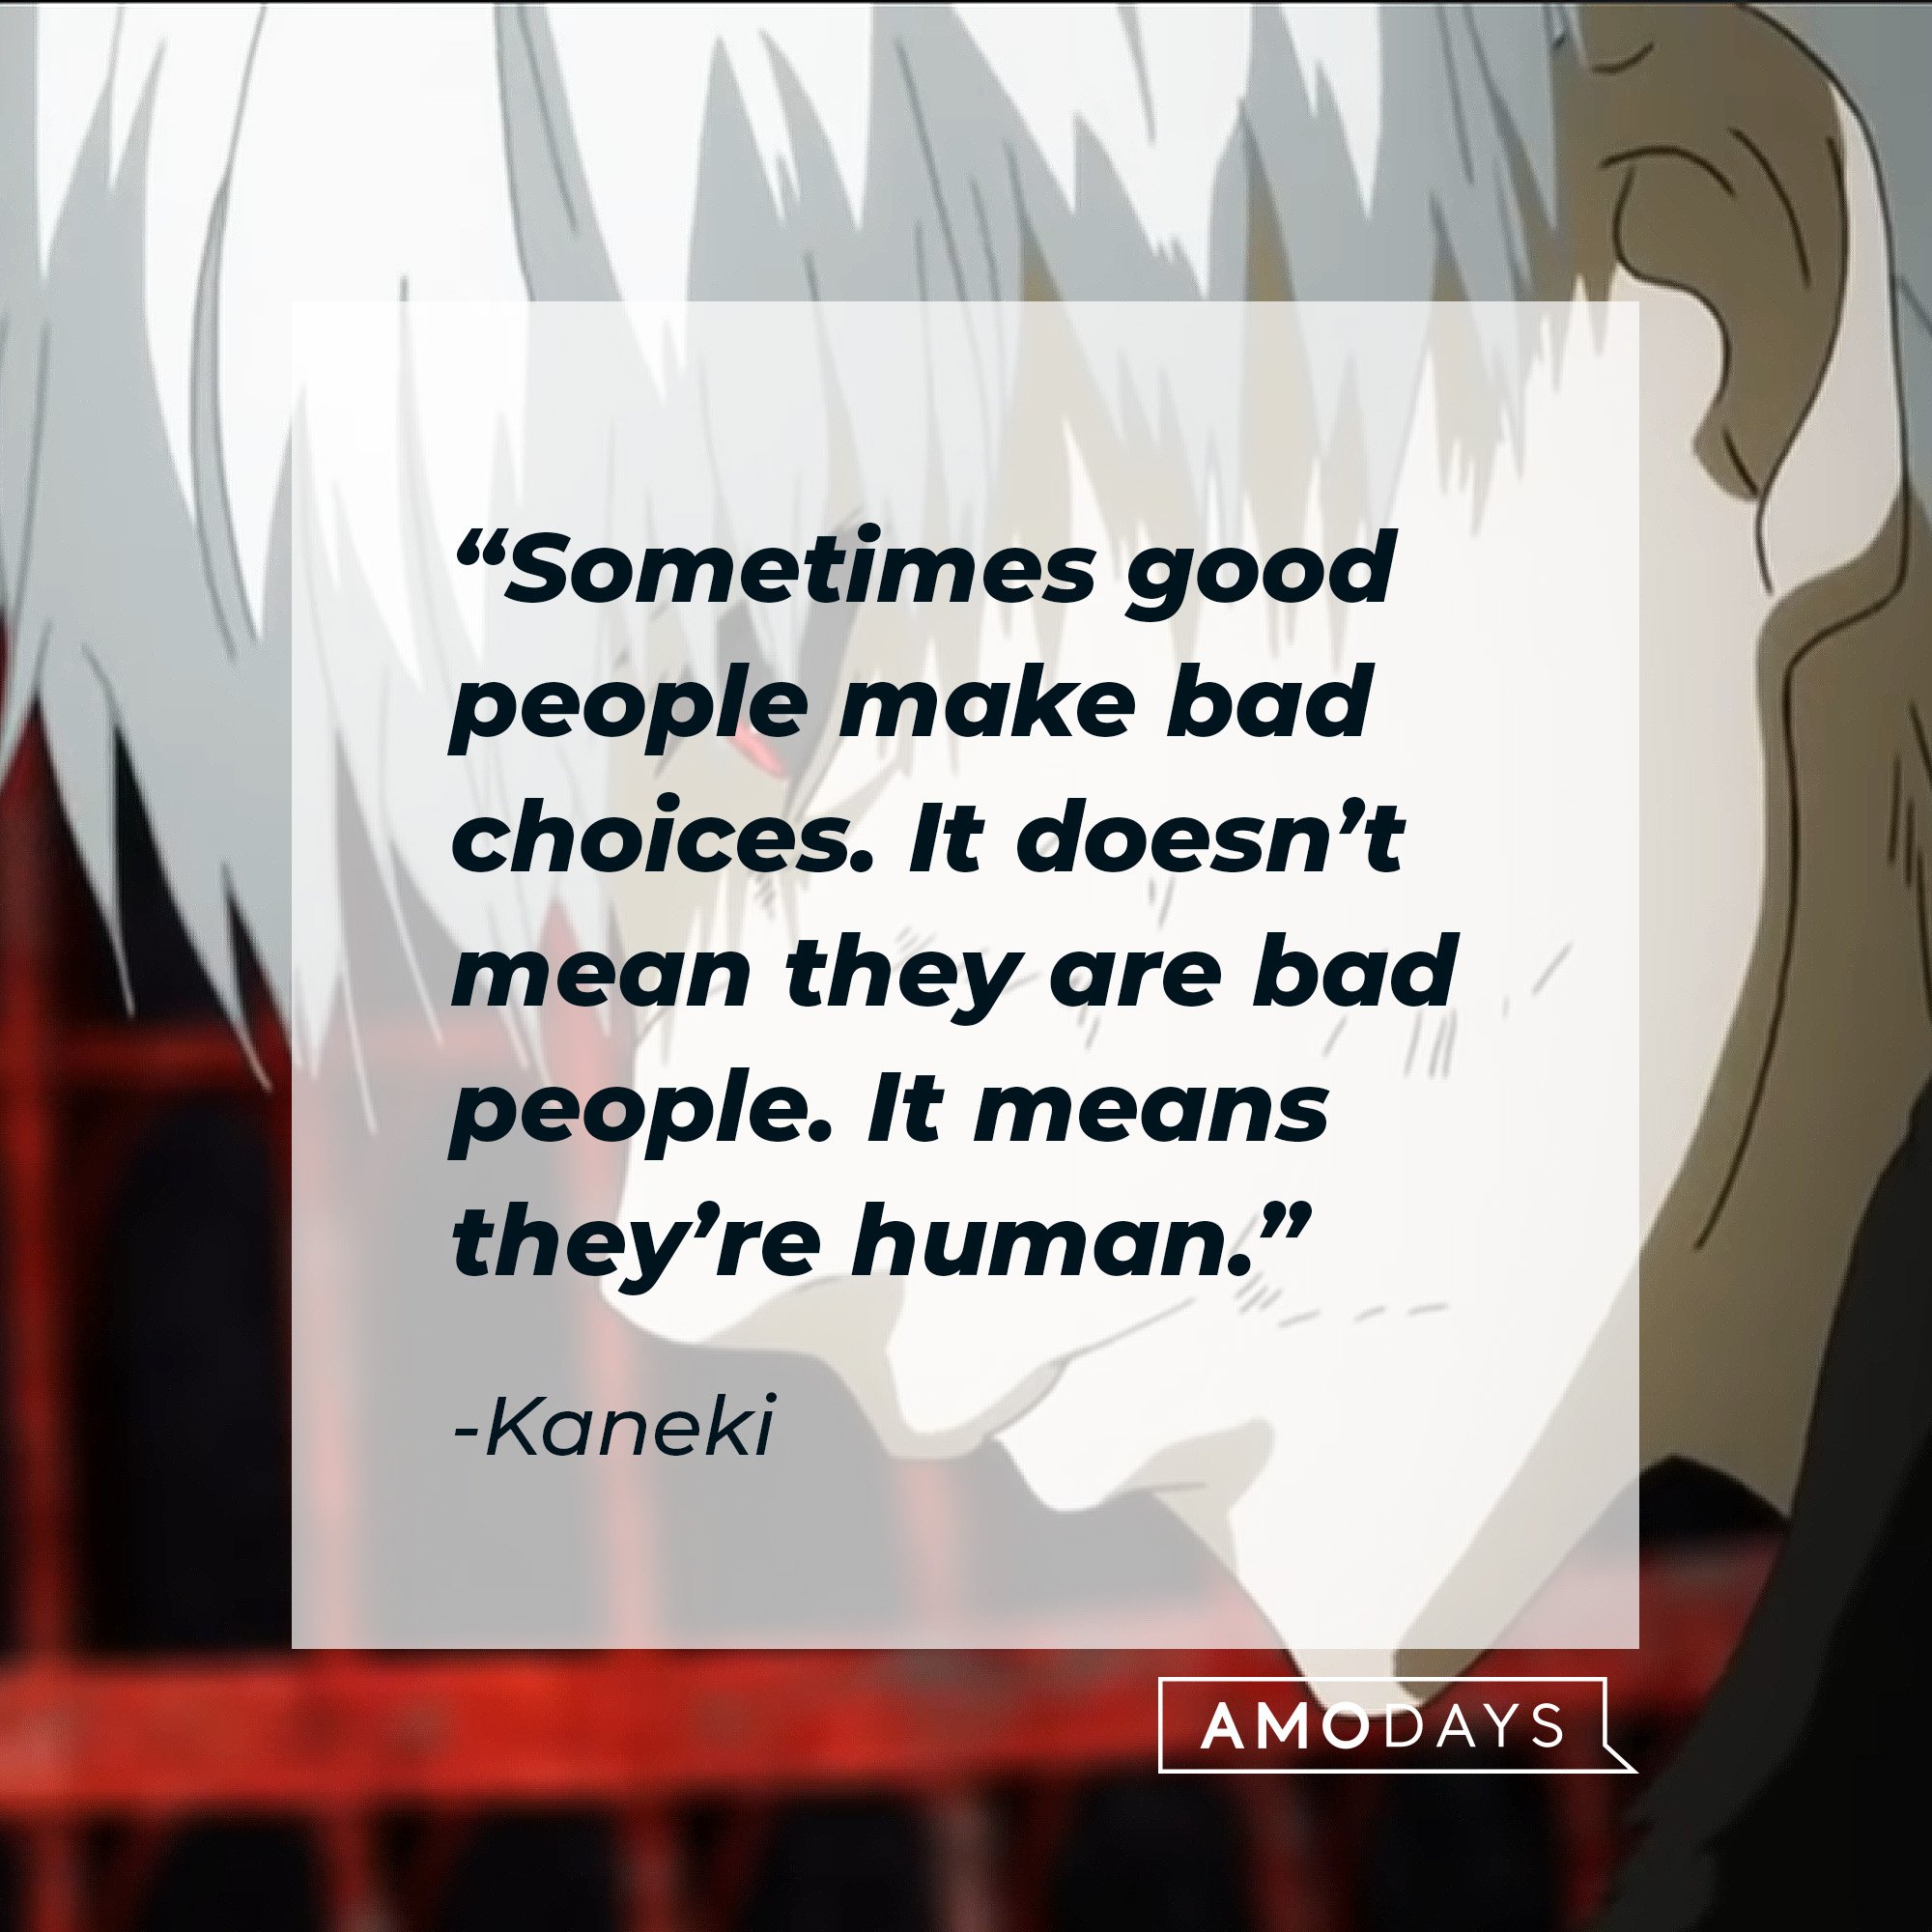 Kaneki's quote: “Sometimes good people make bad choices. It doesn’t mean they are bad people. It means they’re human.”  | Image: AmoDays